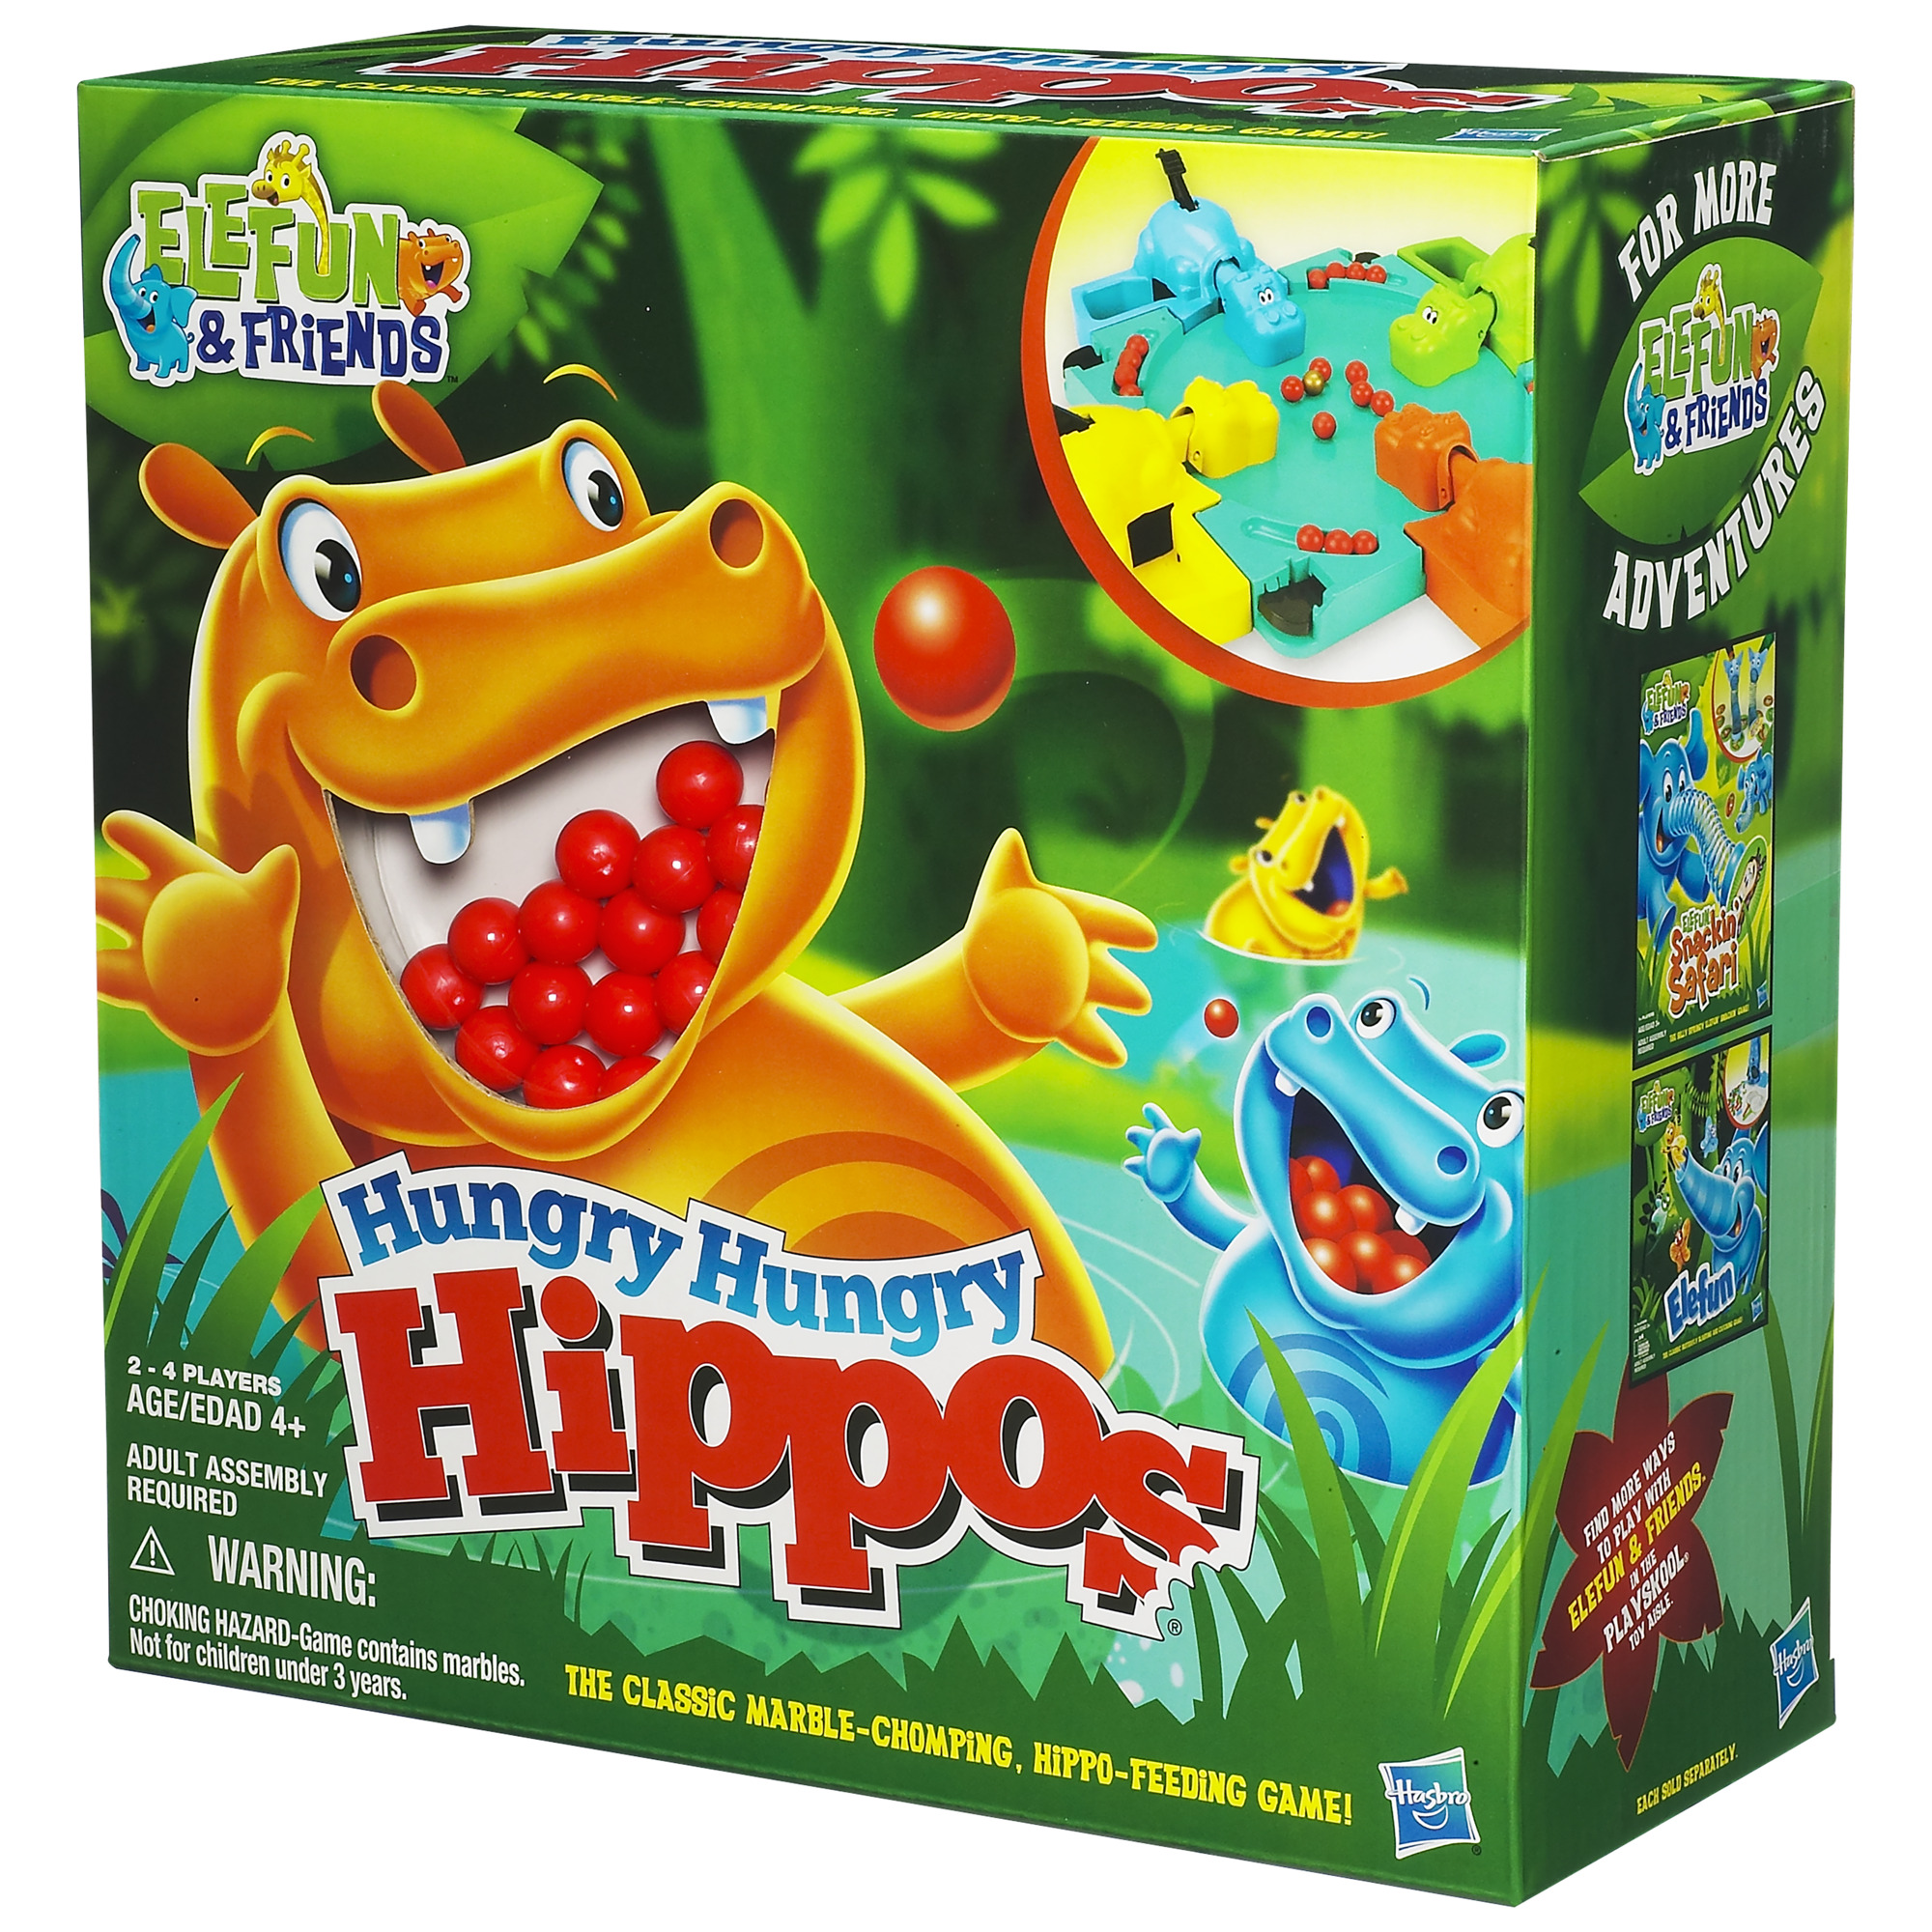 Elefun and Friends Hungry Hungry Hippos Classic Board Game for Kids and Family Ages 4 and Up - image 4 of 12